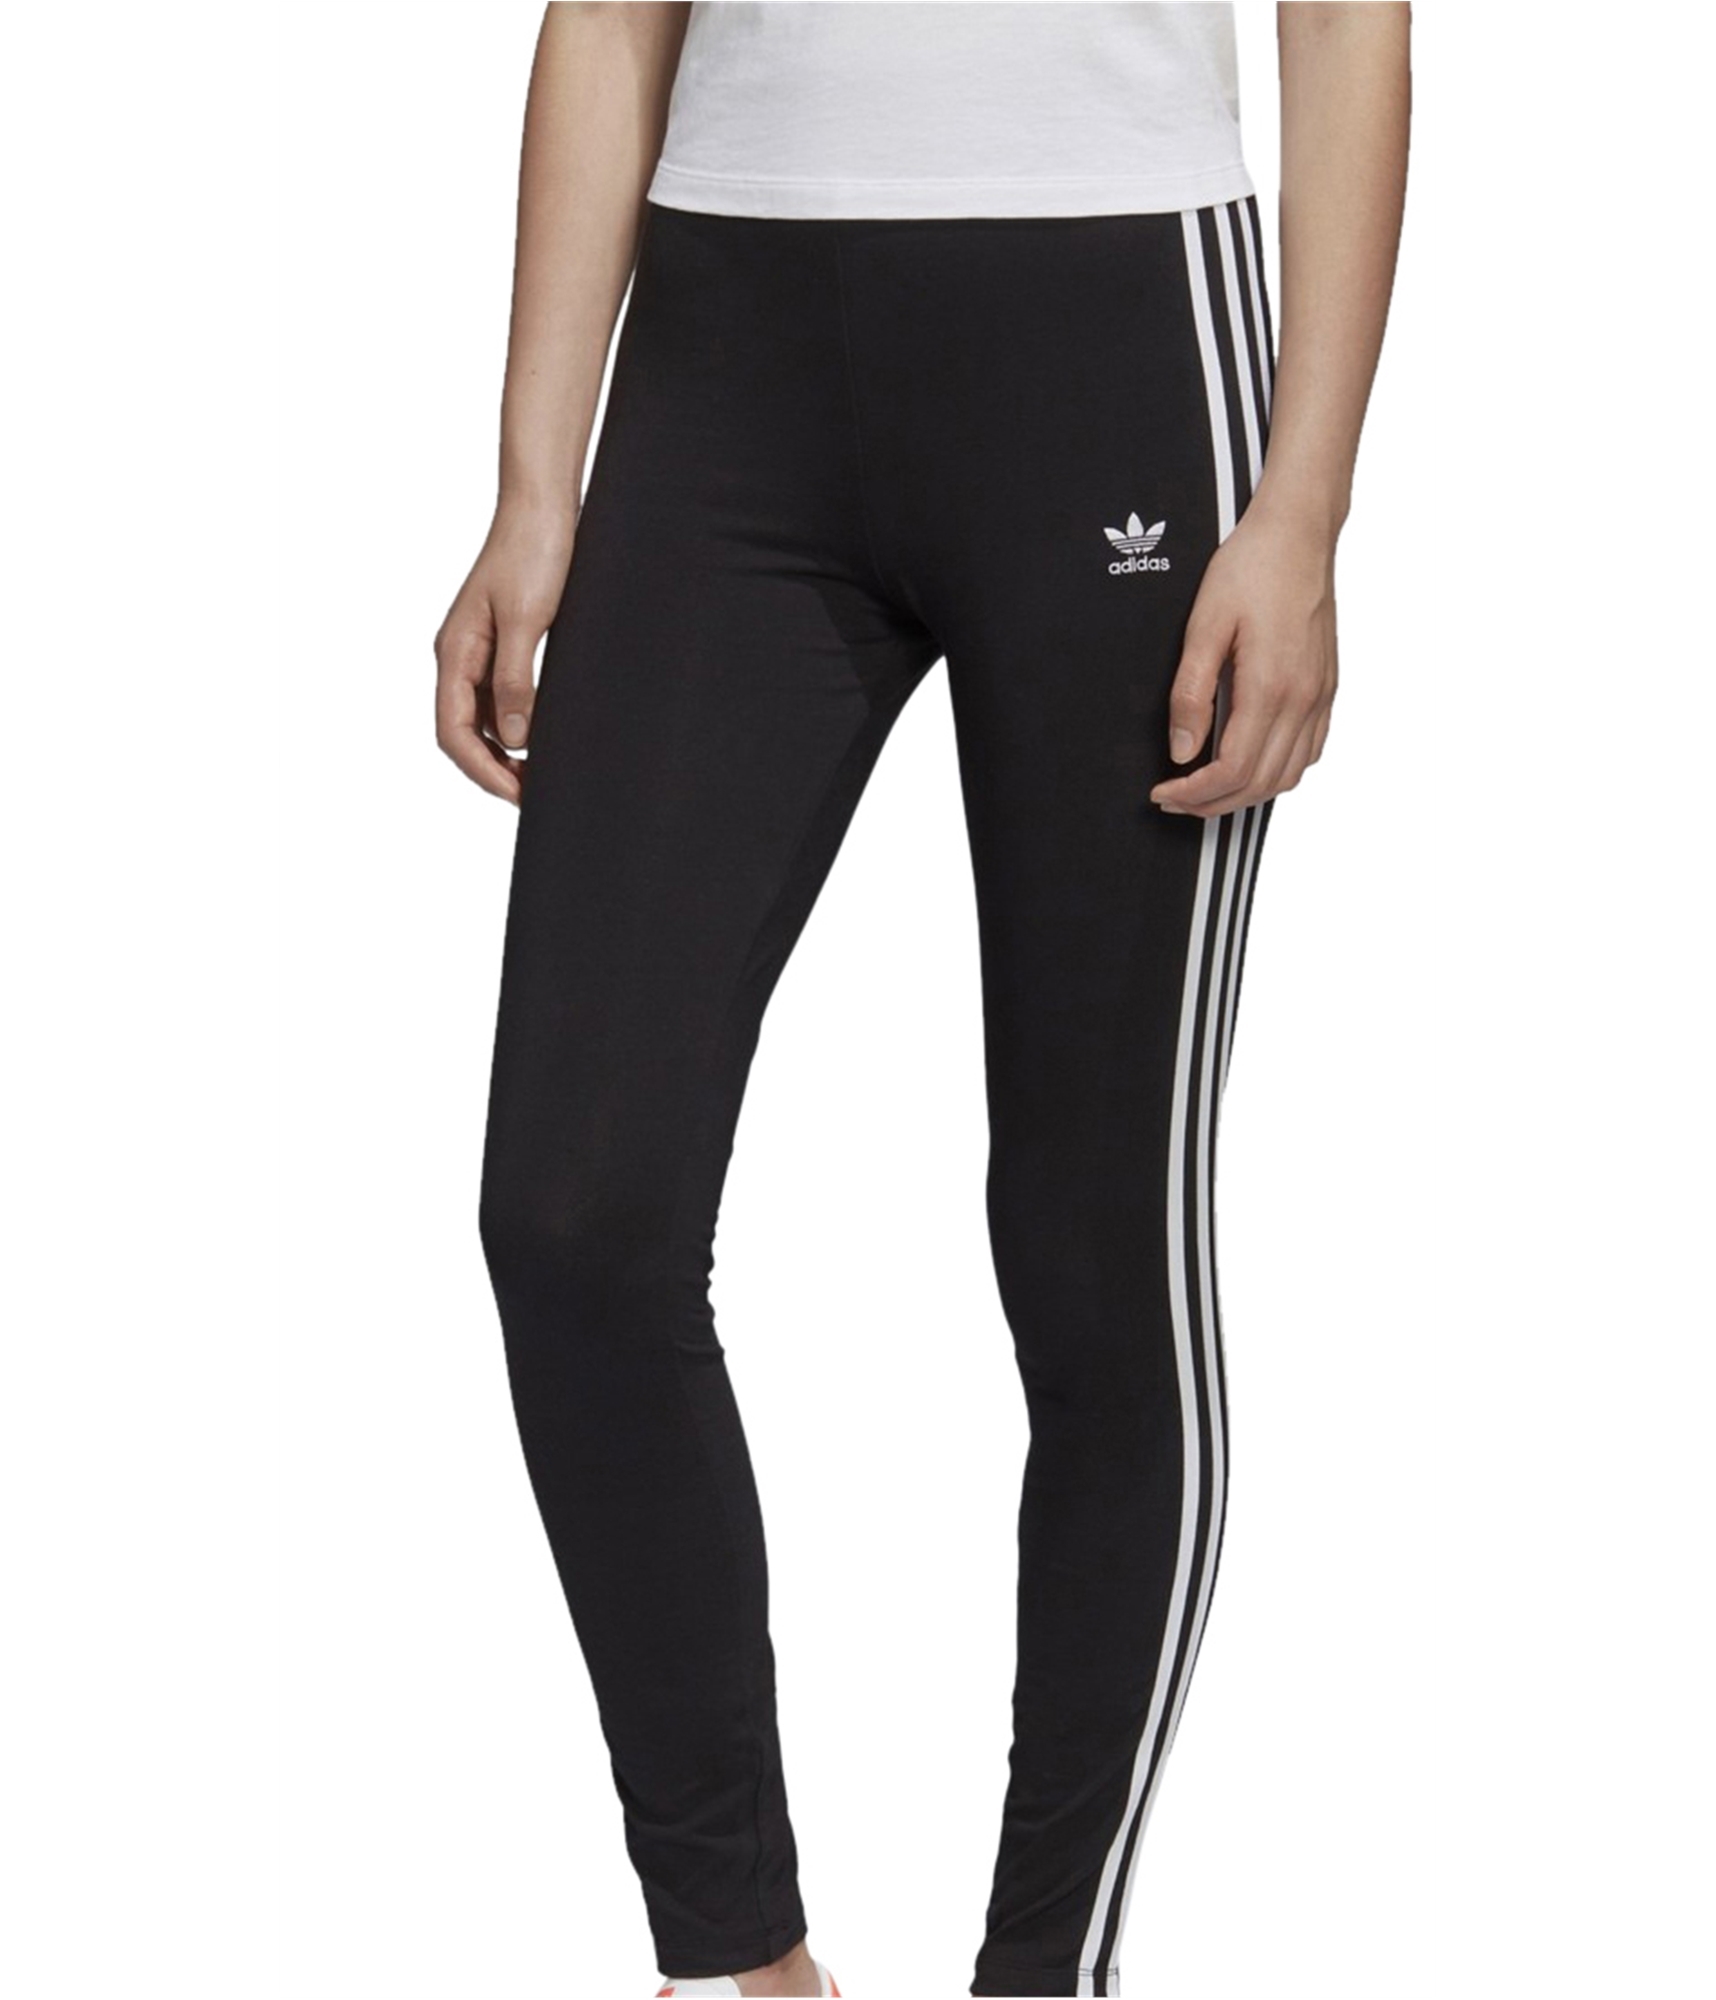 Buy a 3-STRIPES TIGHTS Athletic Pants Online | TagsWeekly.com